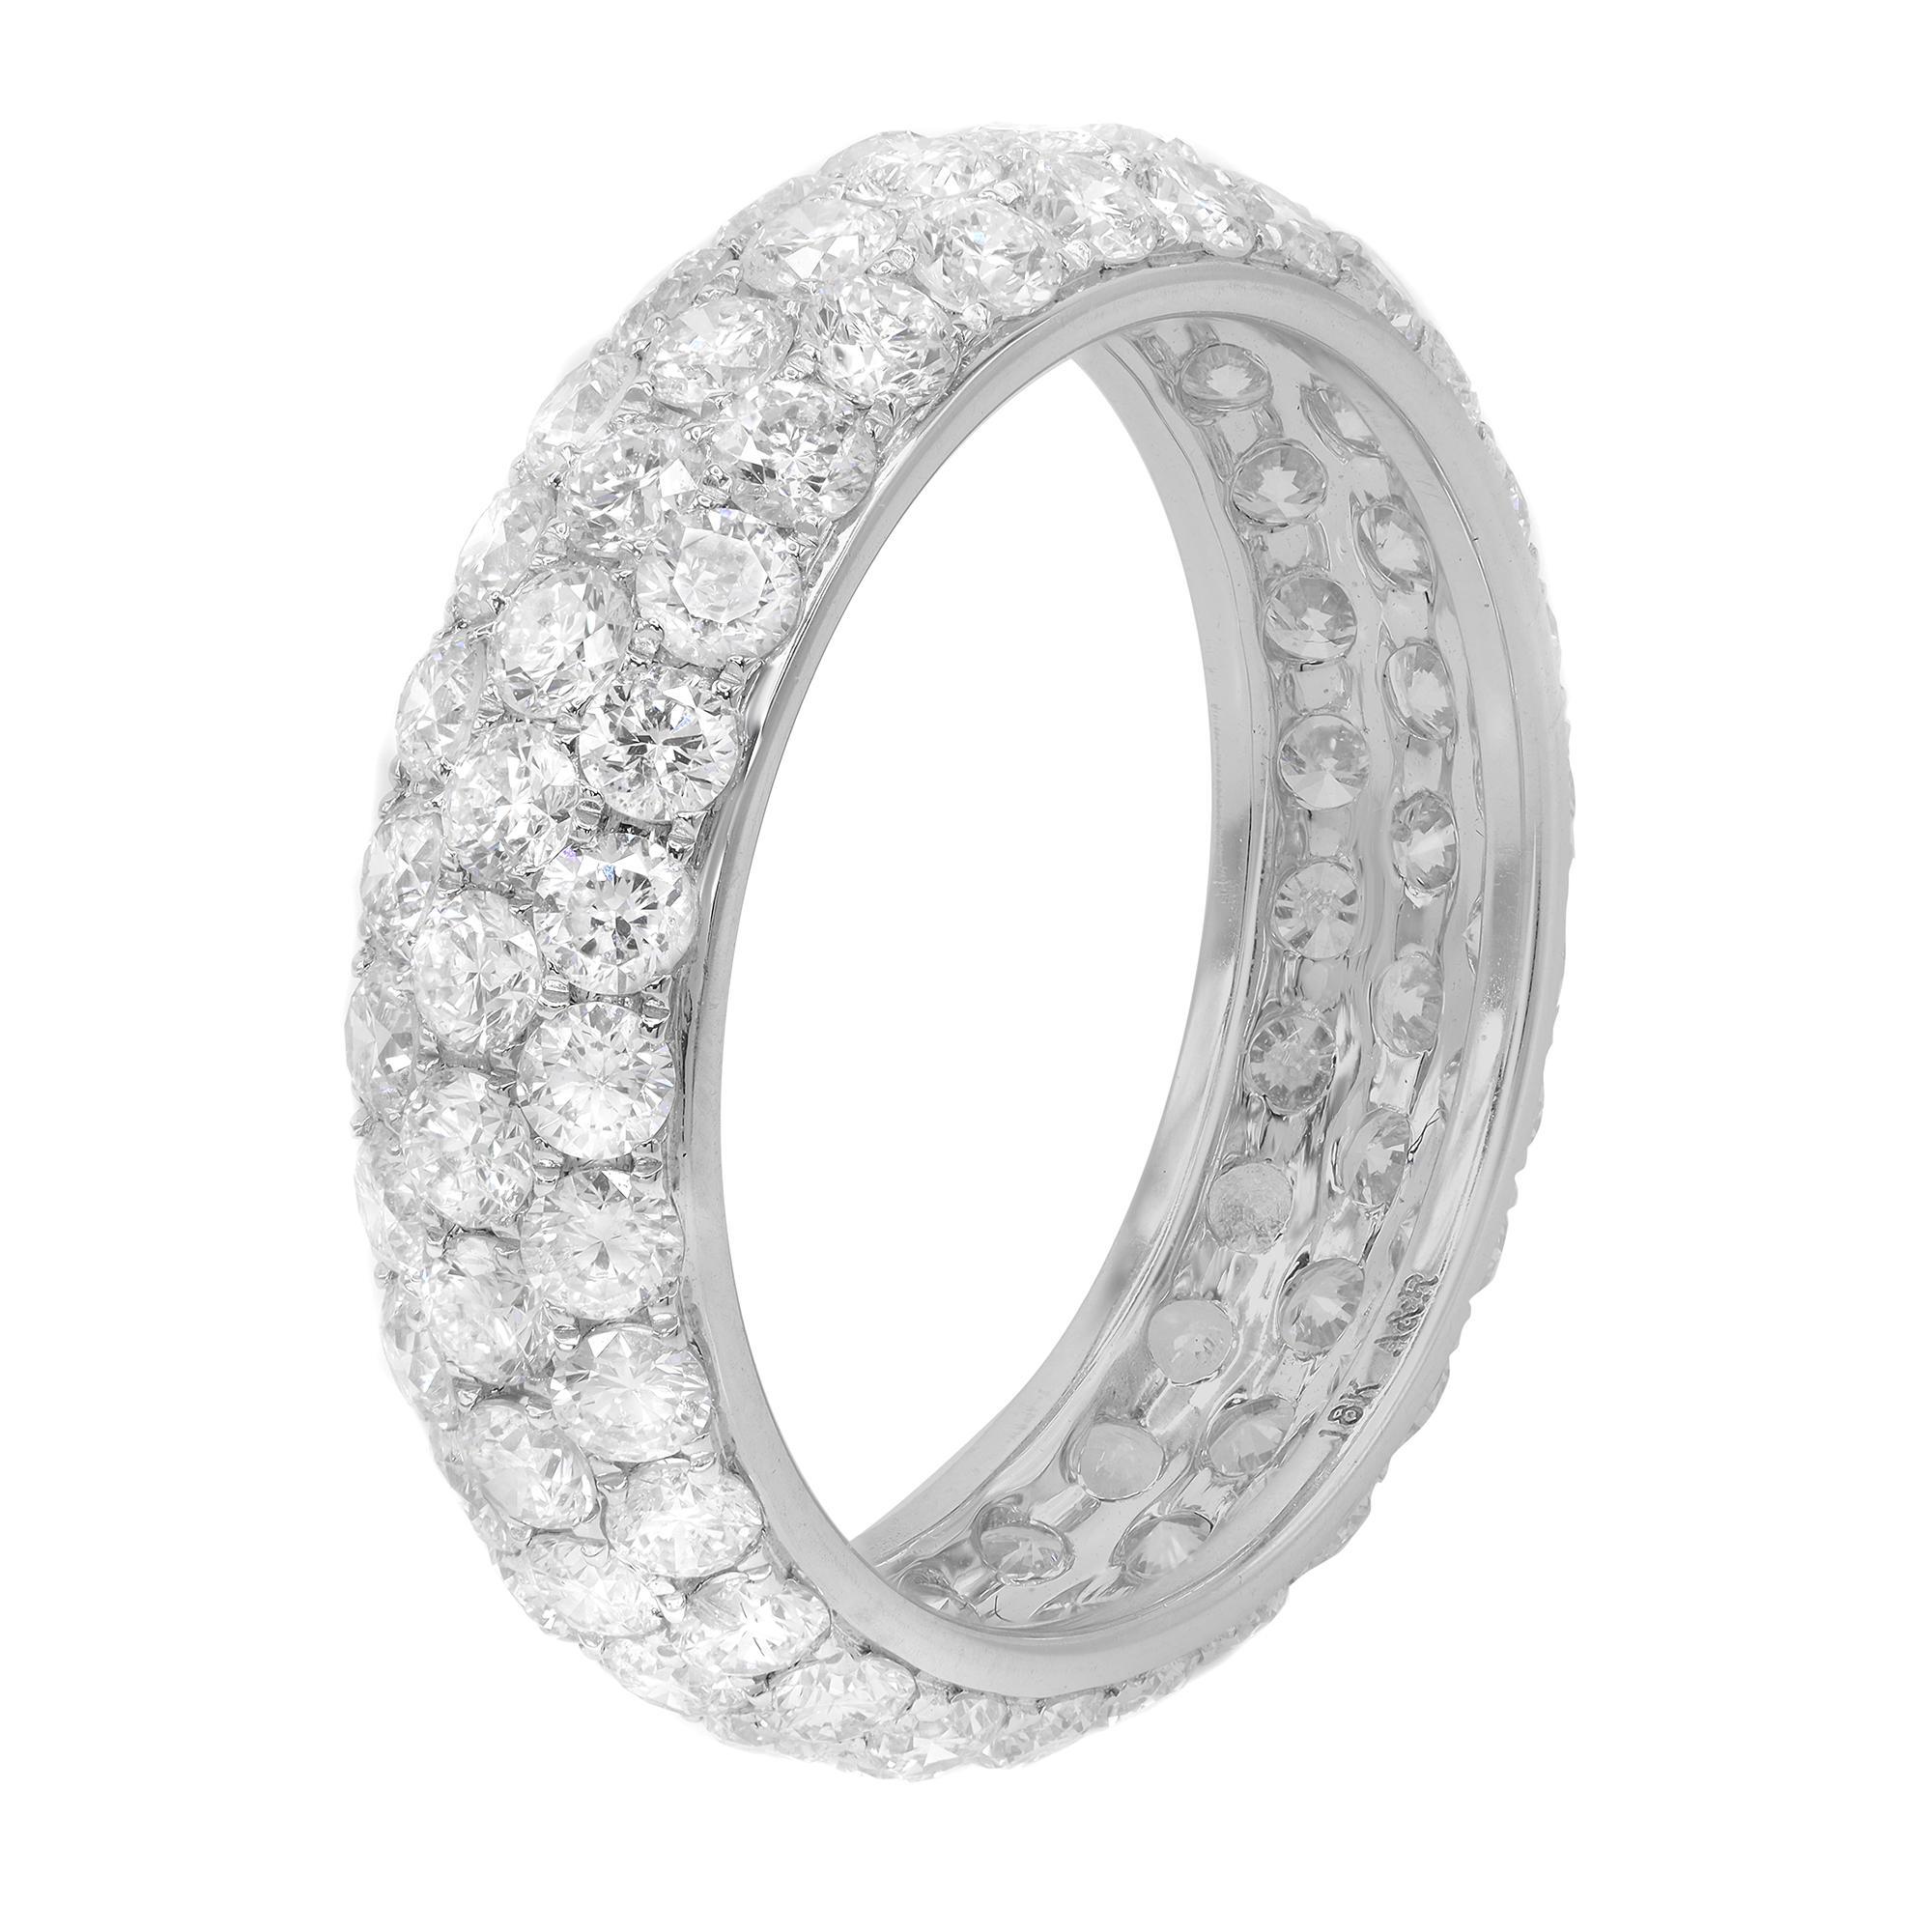 This stunning diamond eternity wedding band ring glitters from every conceivable angle. Set with three rows of dazzling round cut diamonds,  totaling 3.22cts. Diamond color F and VS clarity. Wear it as a wedding band or as a fashion ring. Ring size